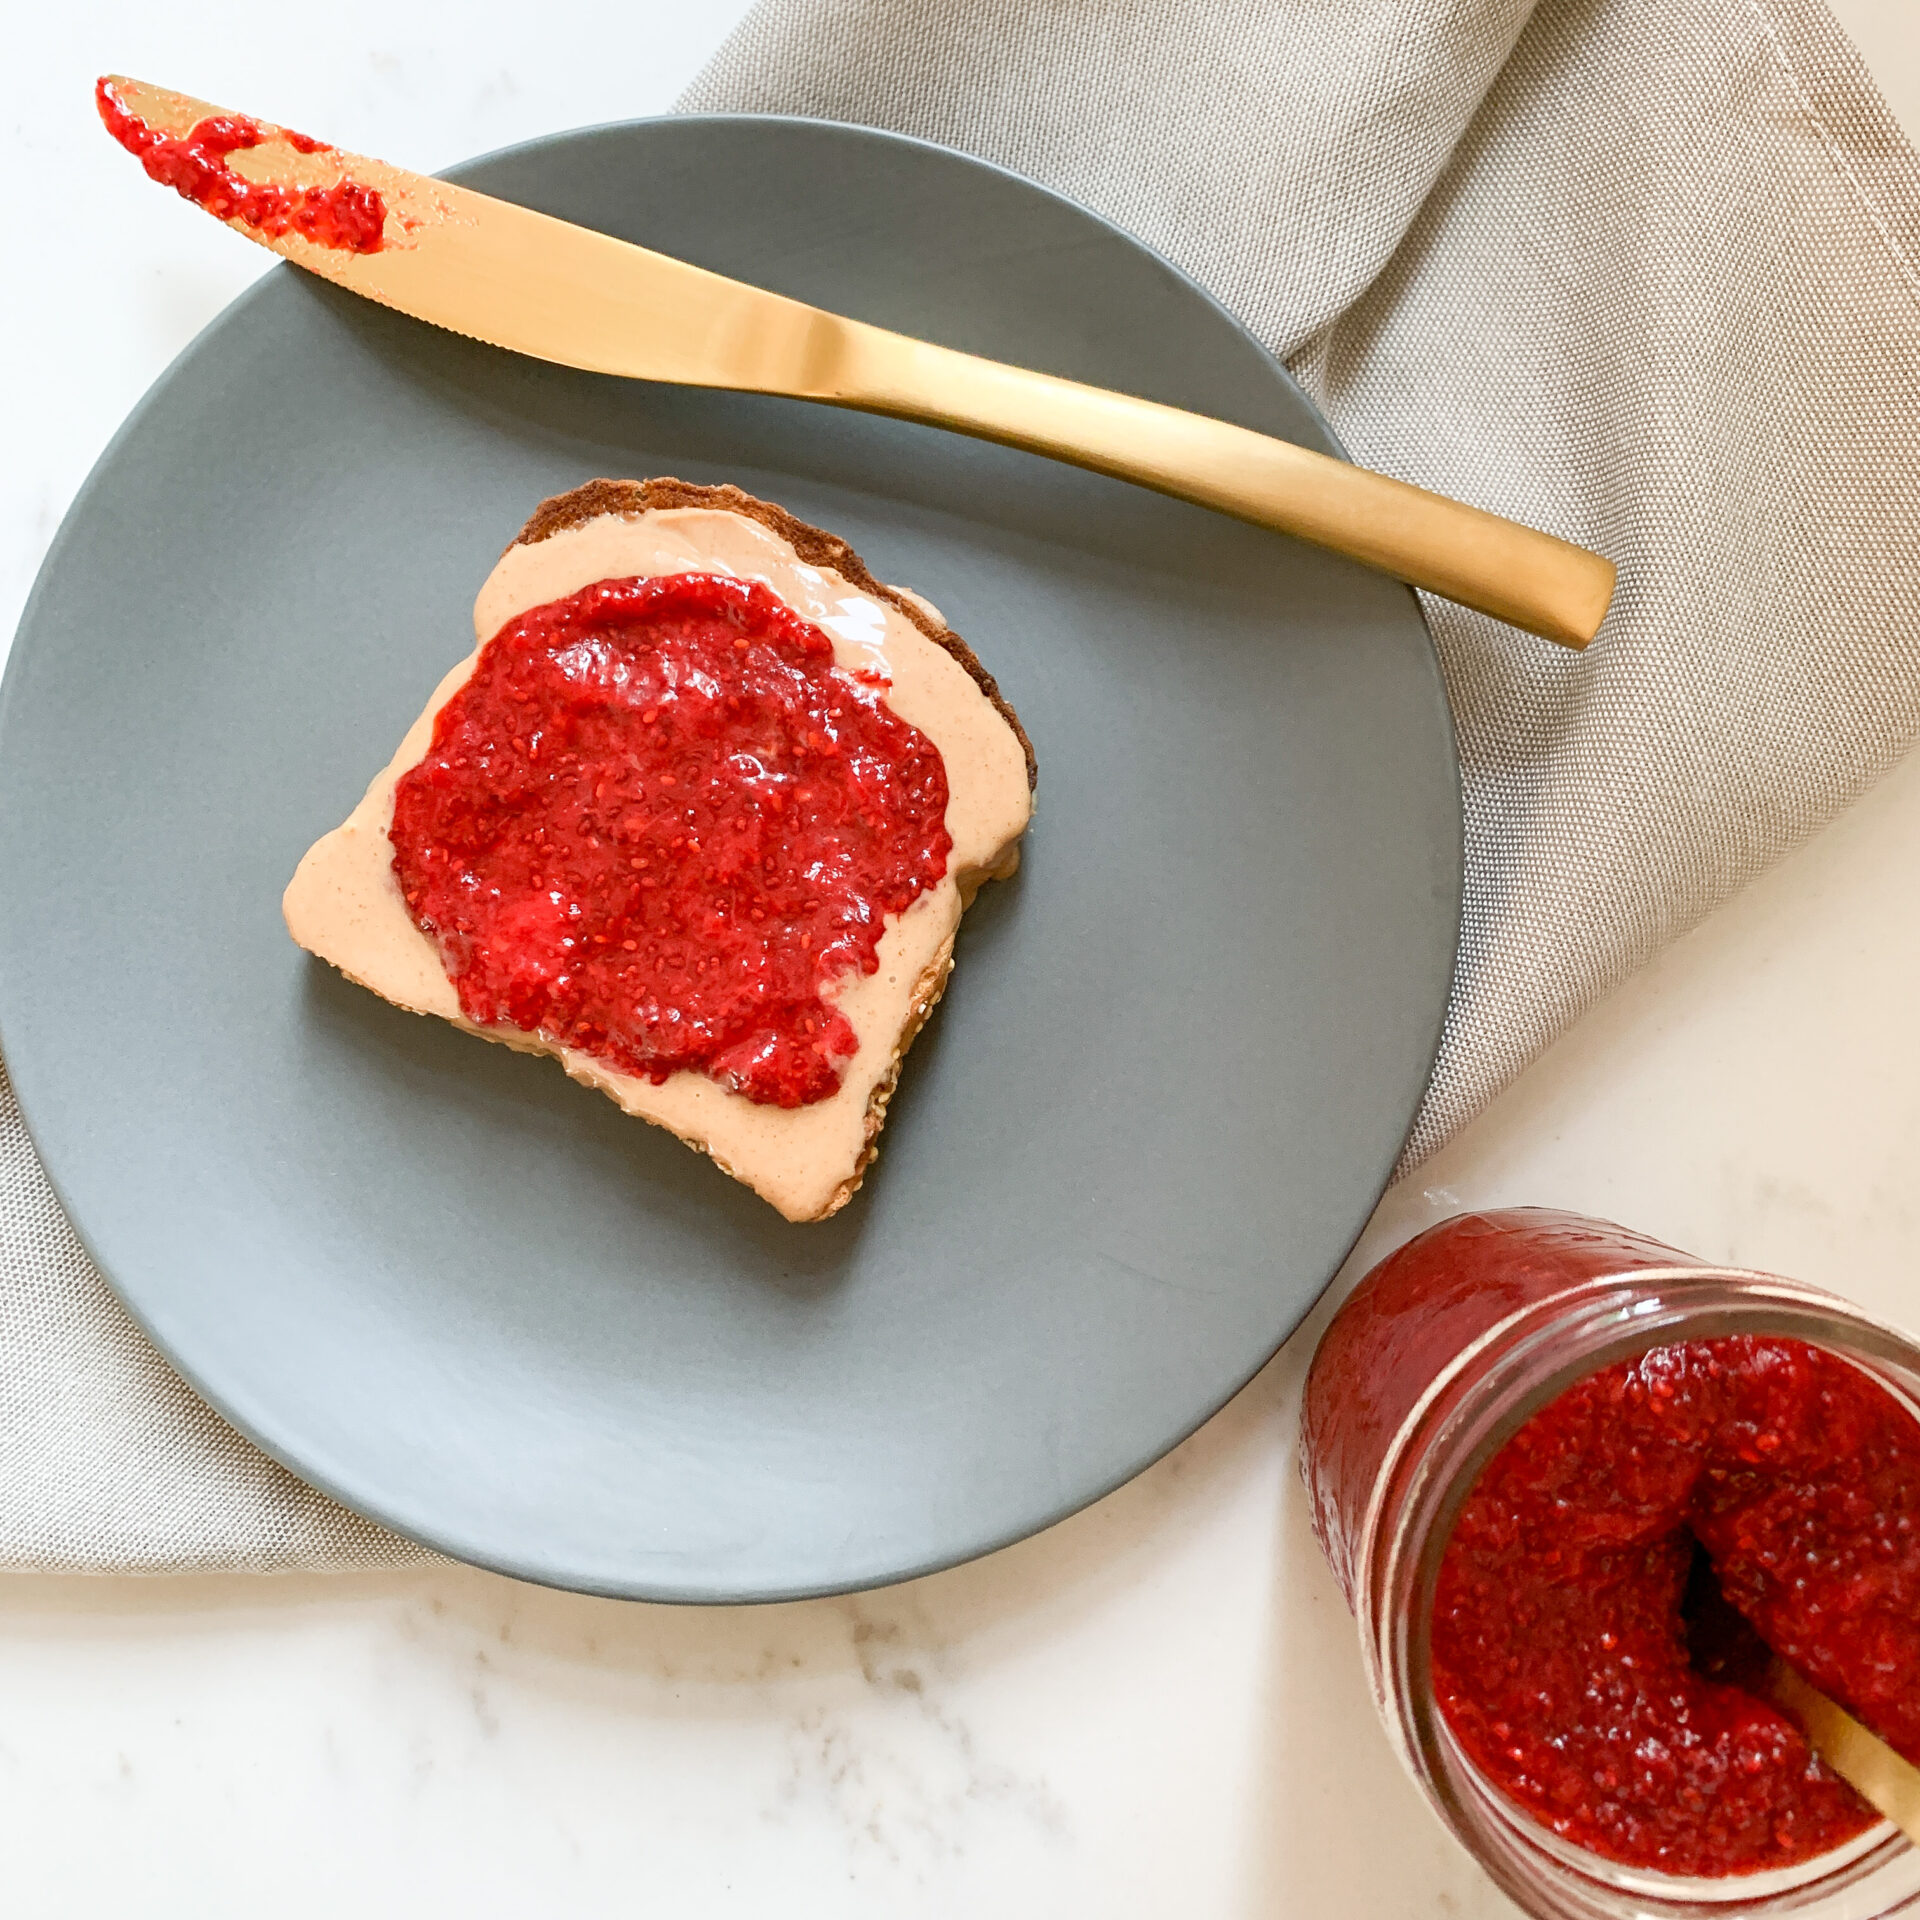 Piece of toast with peanut butter and strawberry jam on a blue plate with a gold-coloured butter knife. Light grey napkin under the plate and a jar of jam to the bottom right of the plate.